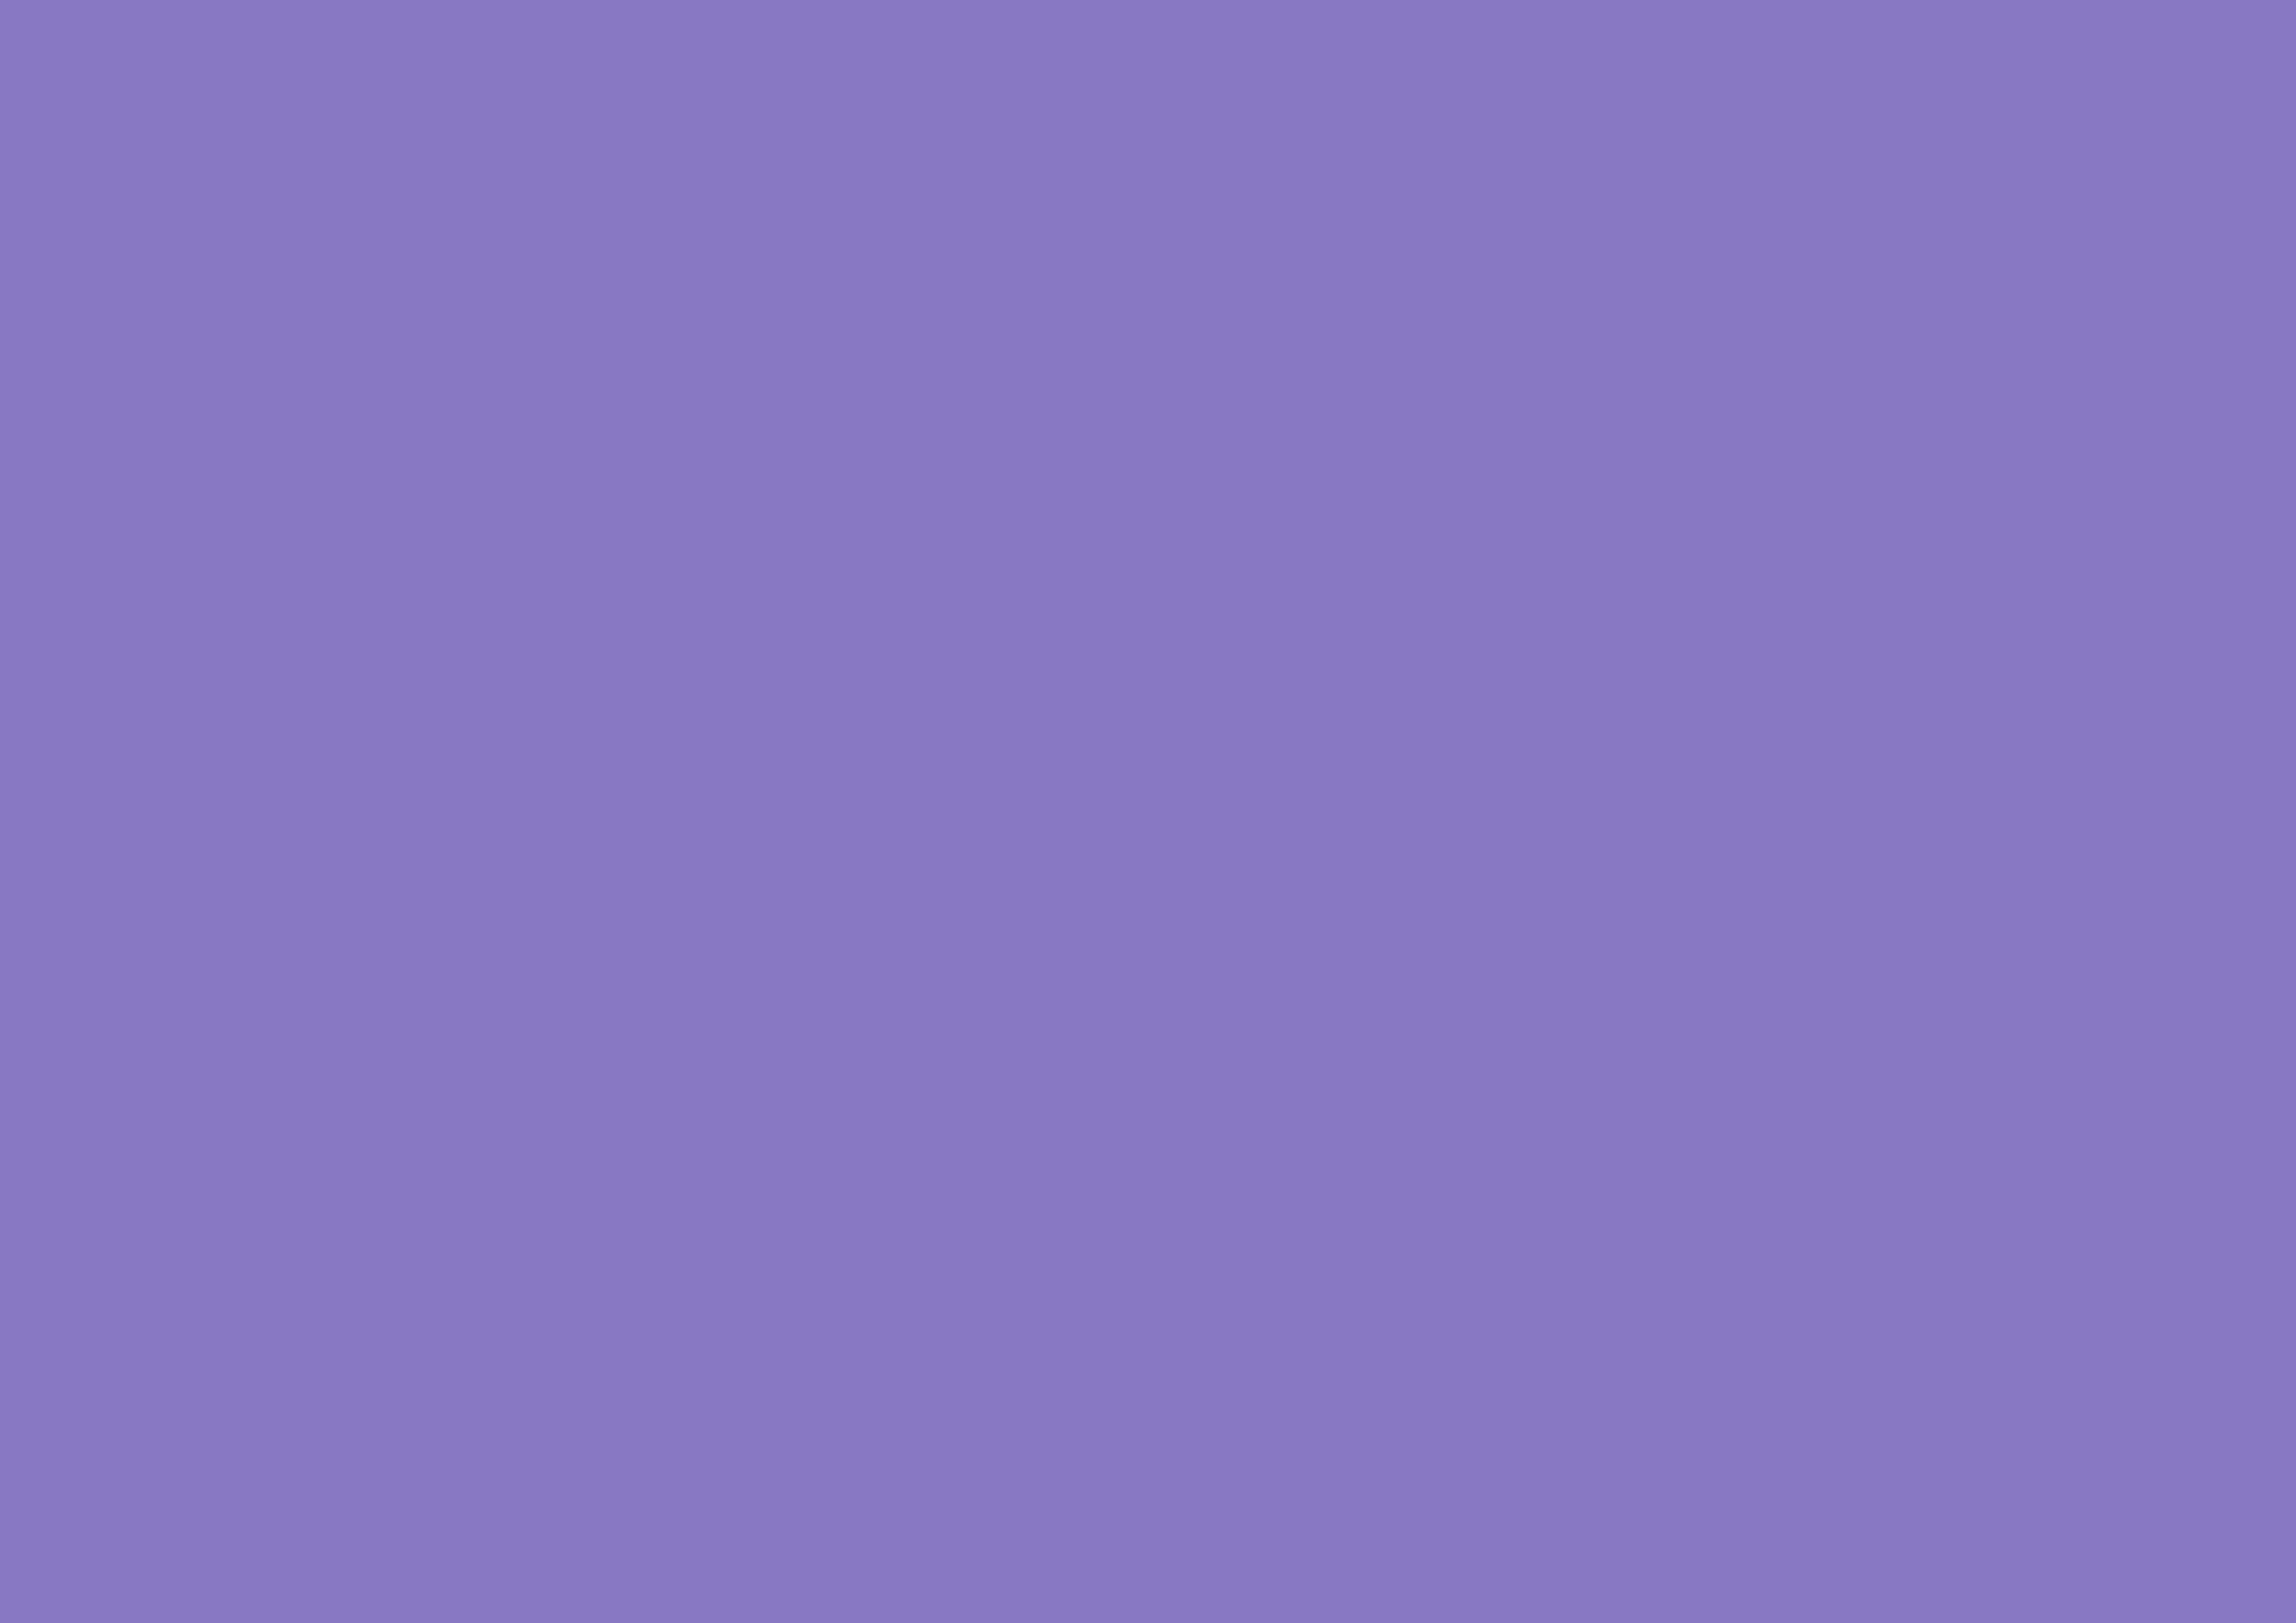 3508x2480 Ube Solid Color Background